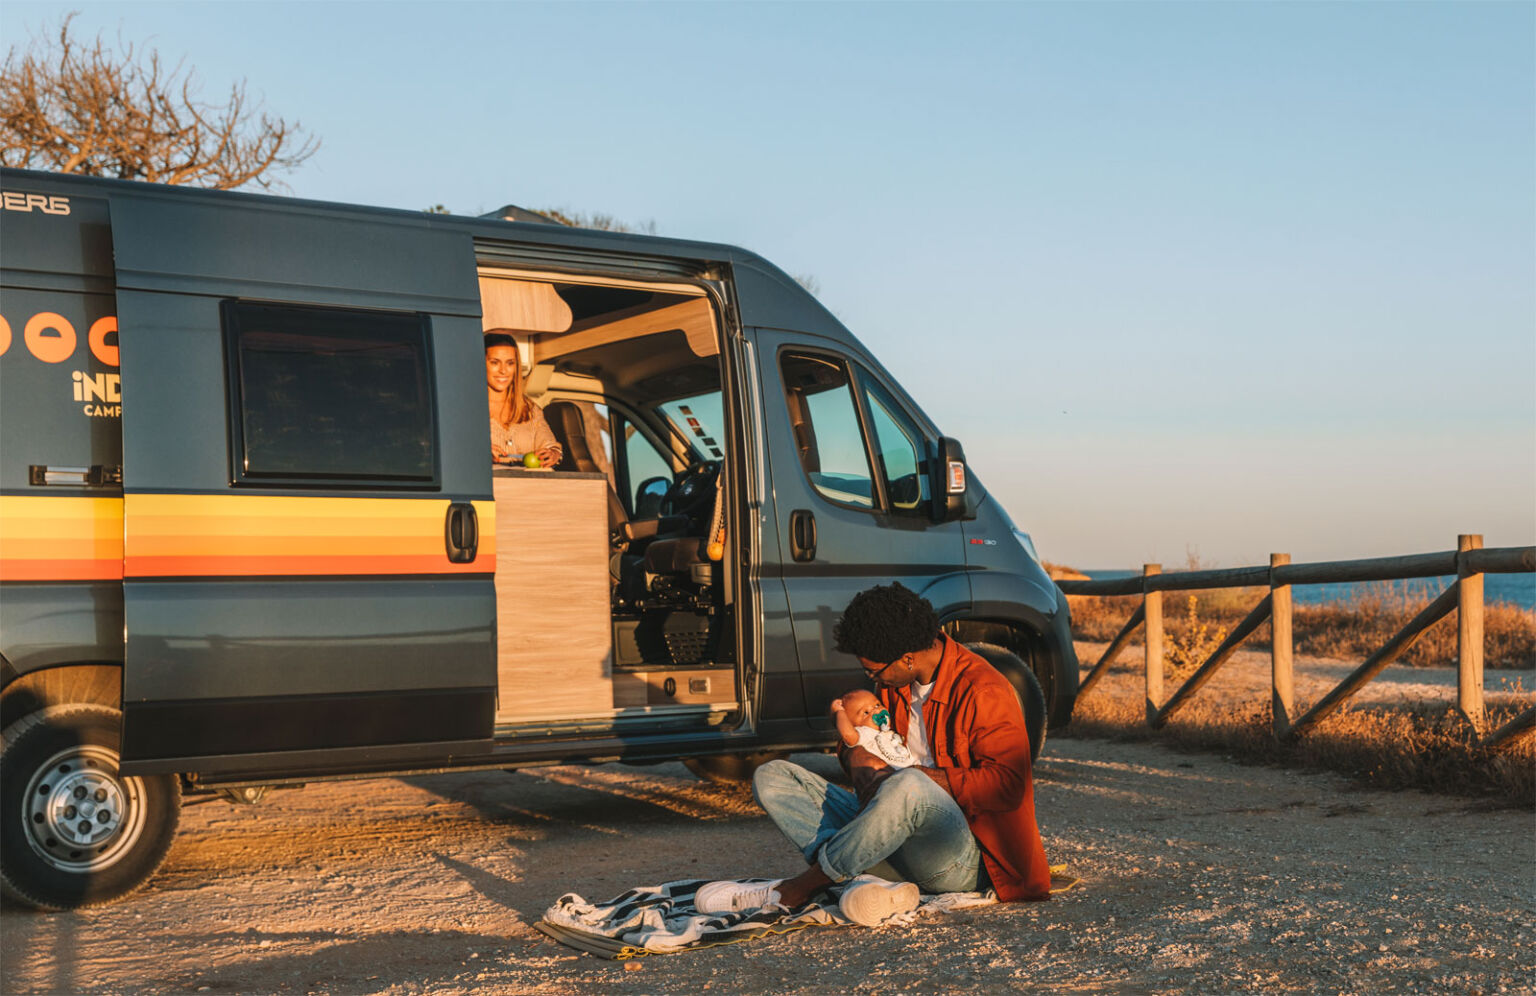 Indie Campers Brings New Rental Centre And 20 Jeep Campers To The U.S.